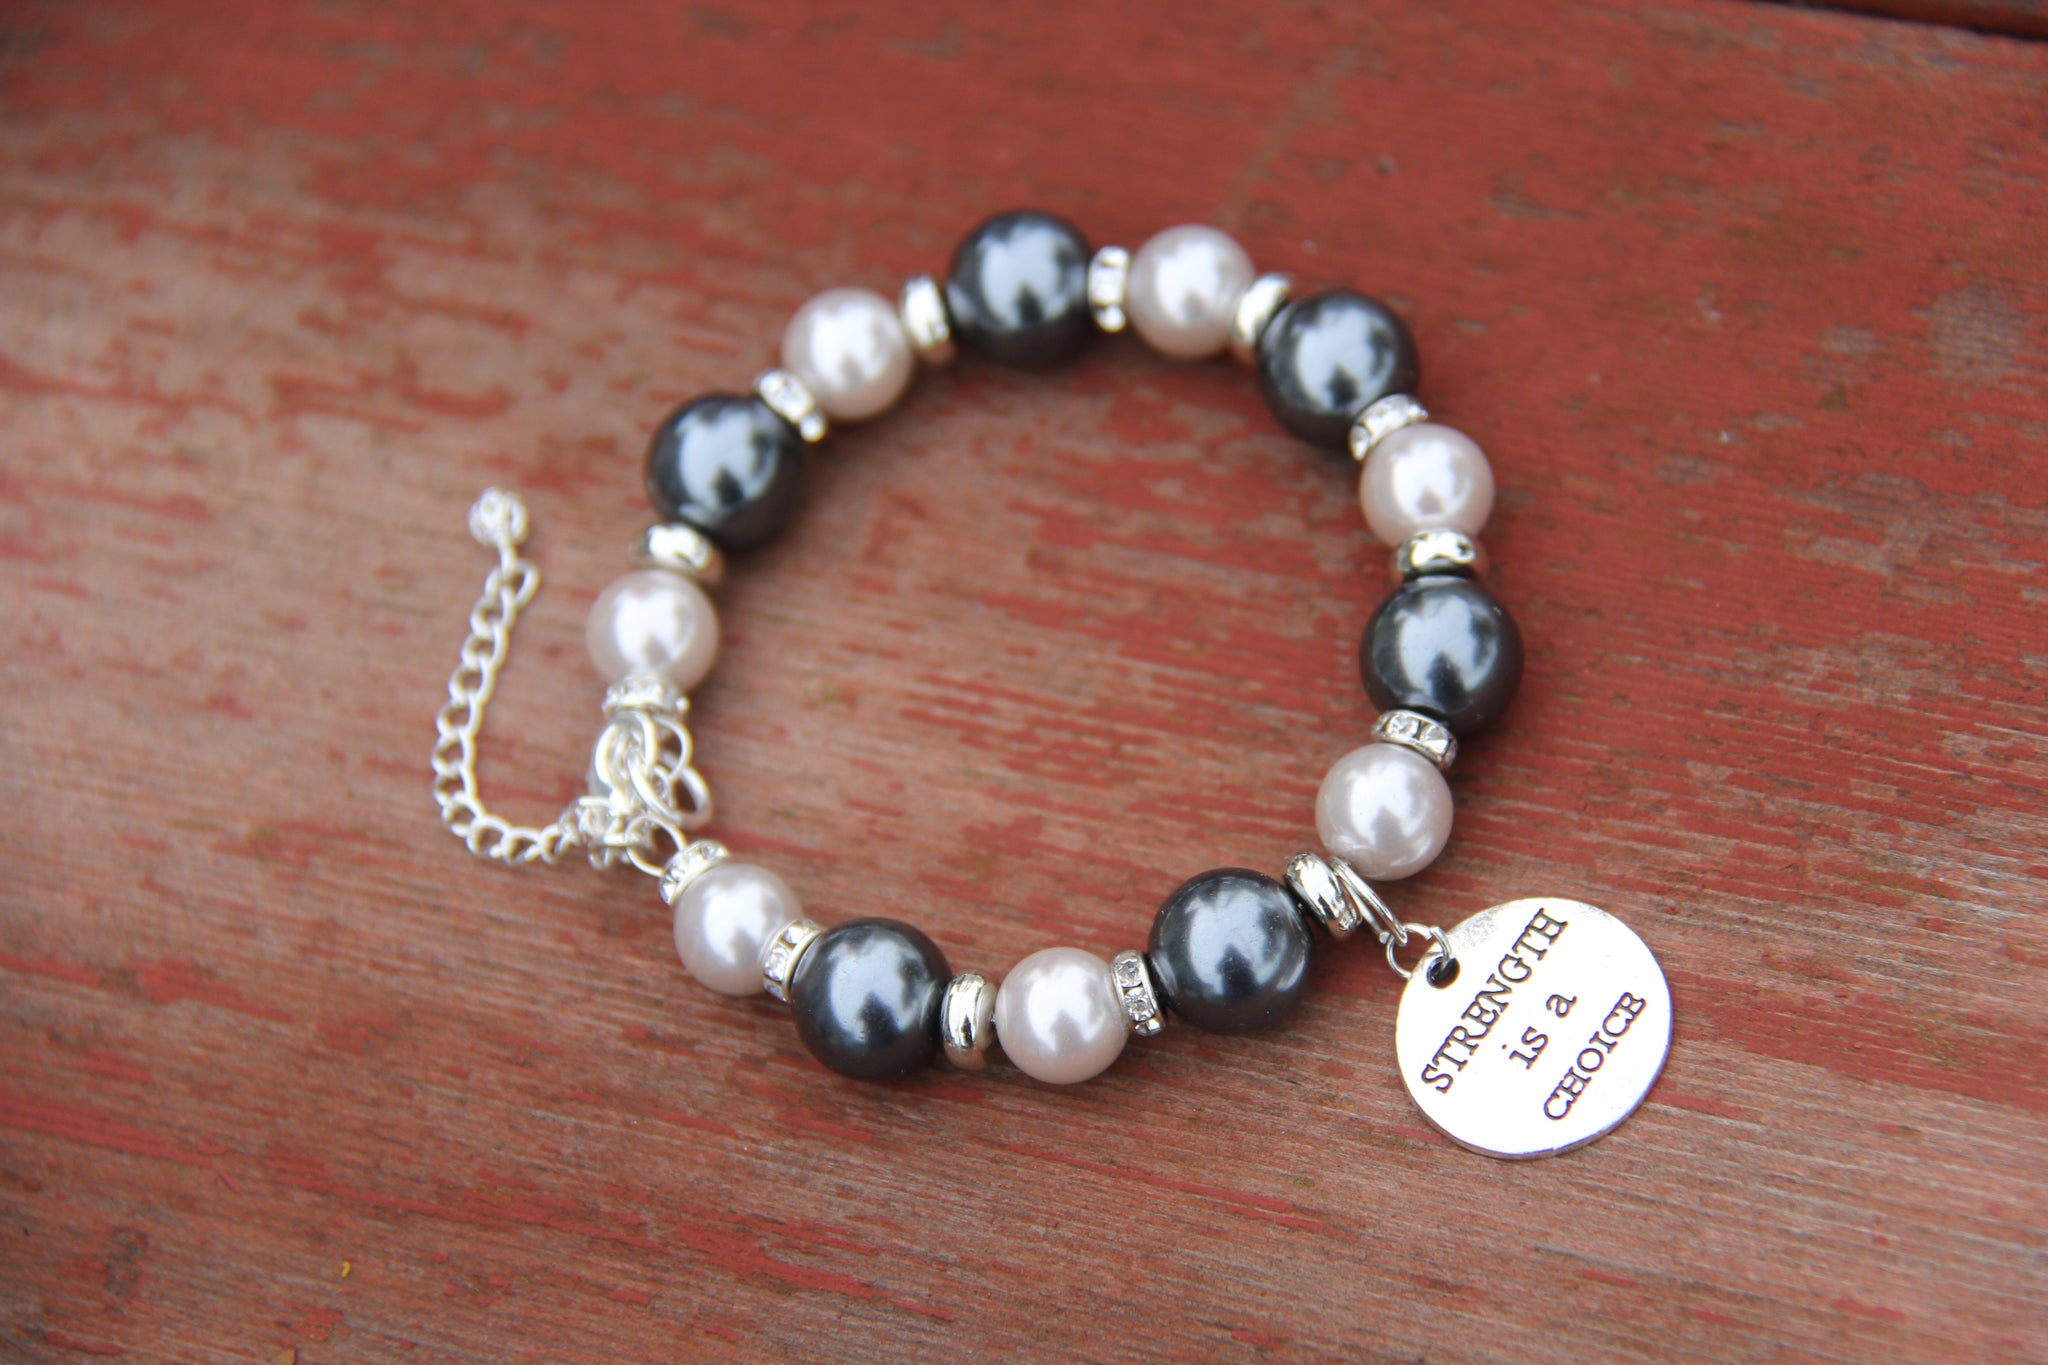 Two shades of grey glass pearl beads with "Strength is a choice" silver charm